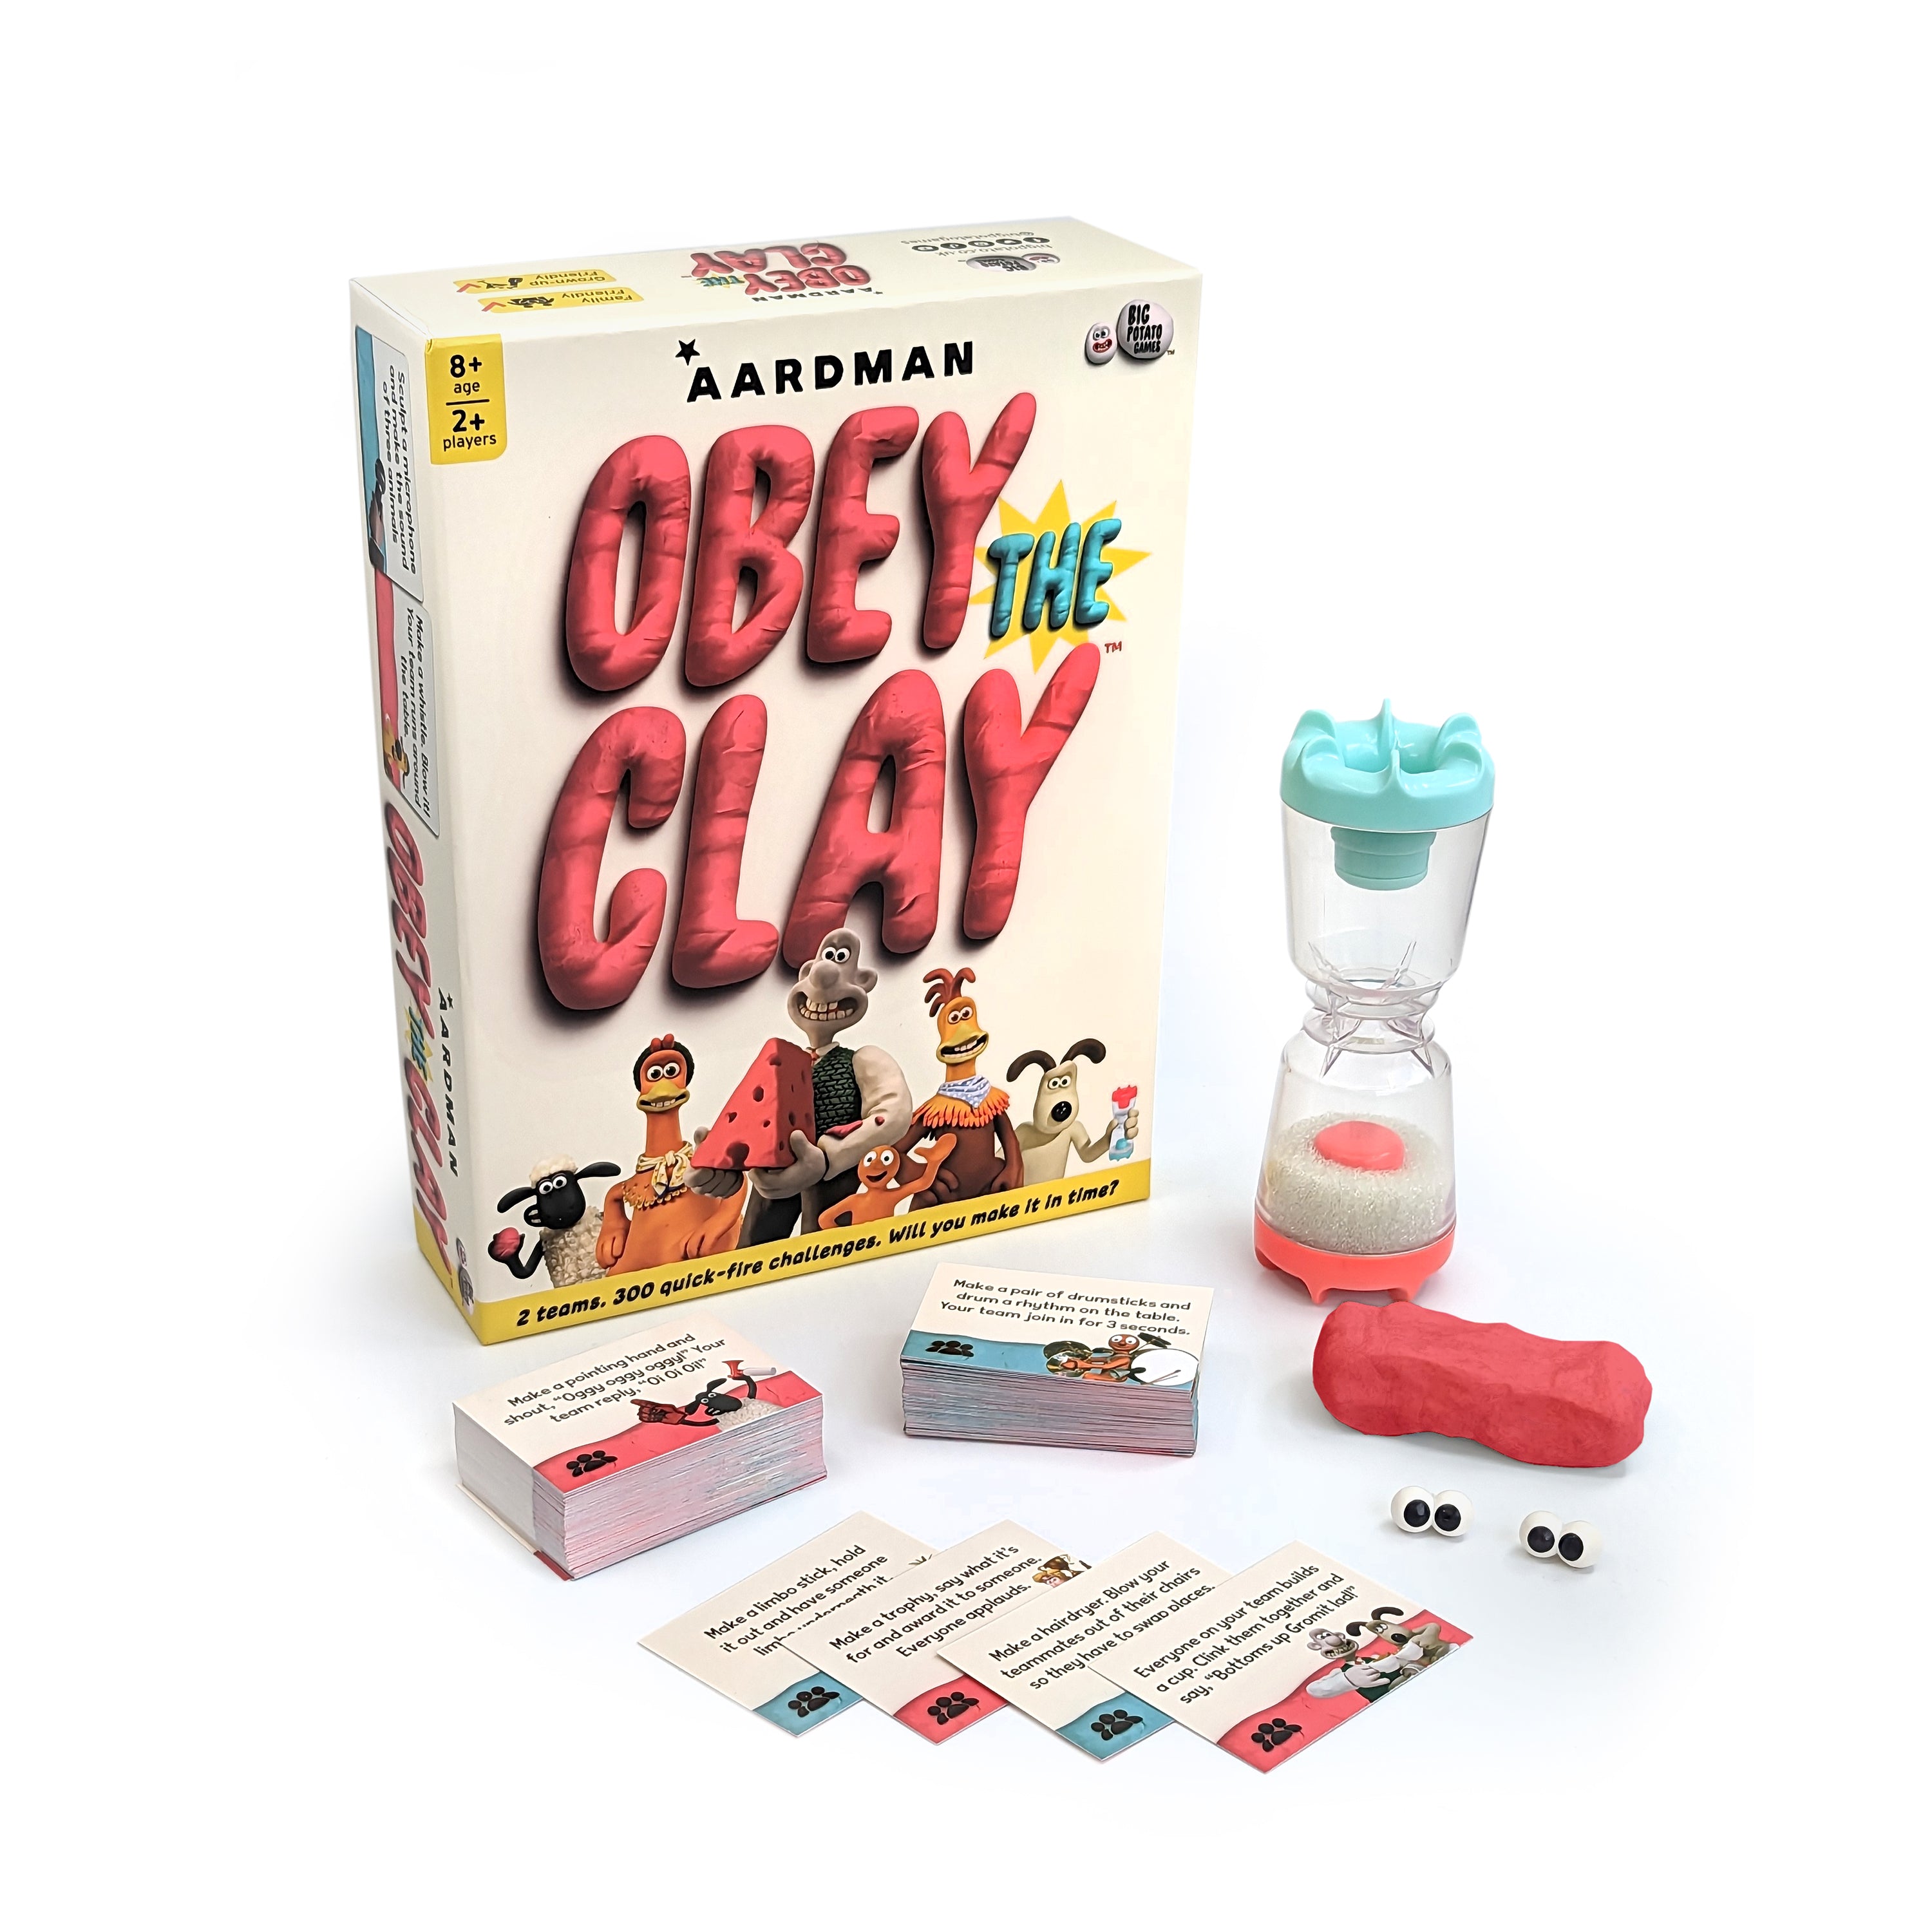 Obey the Clay